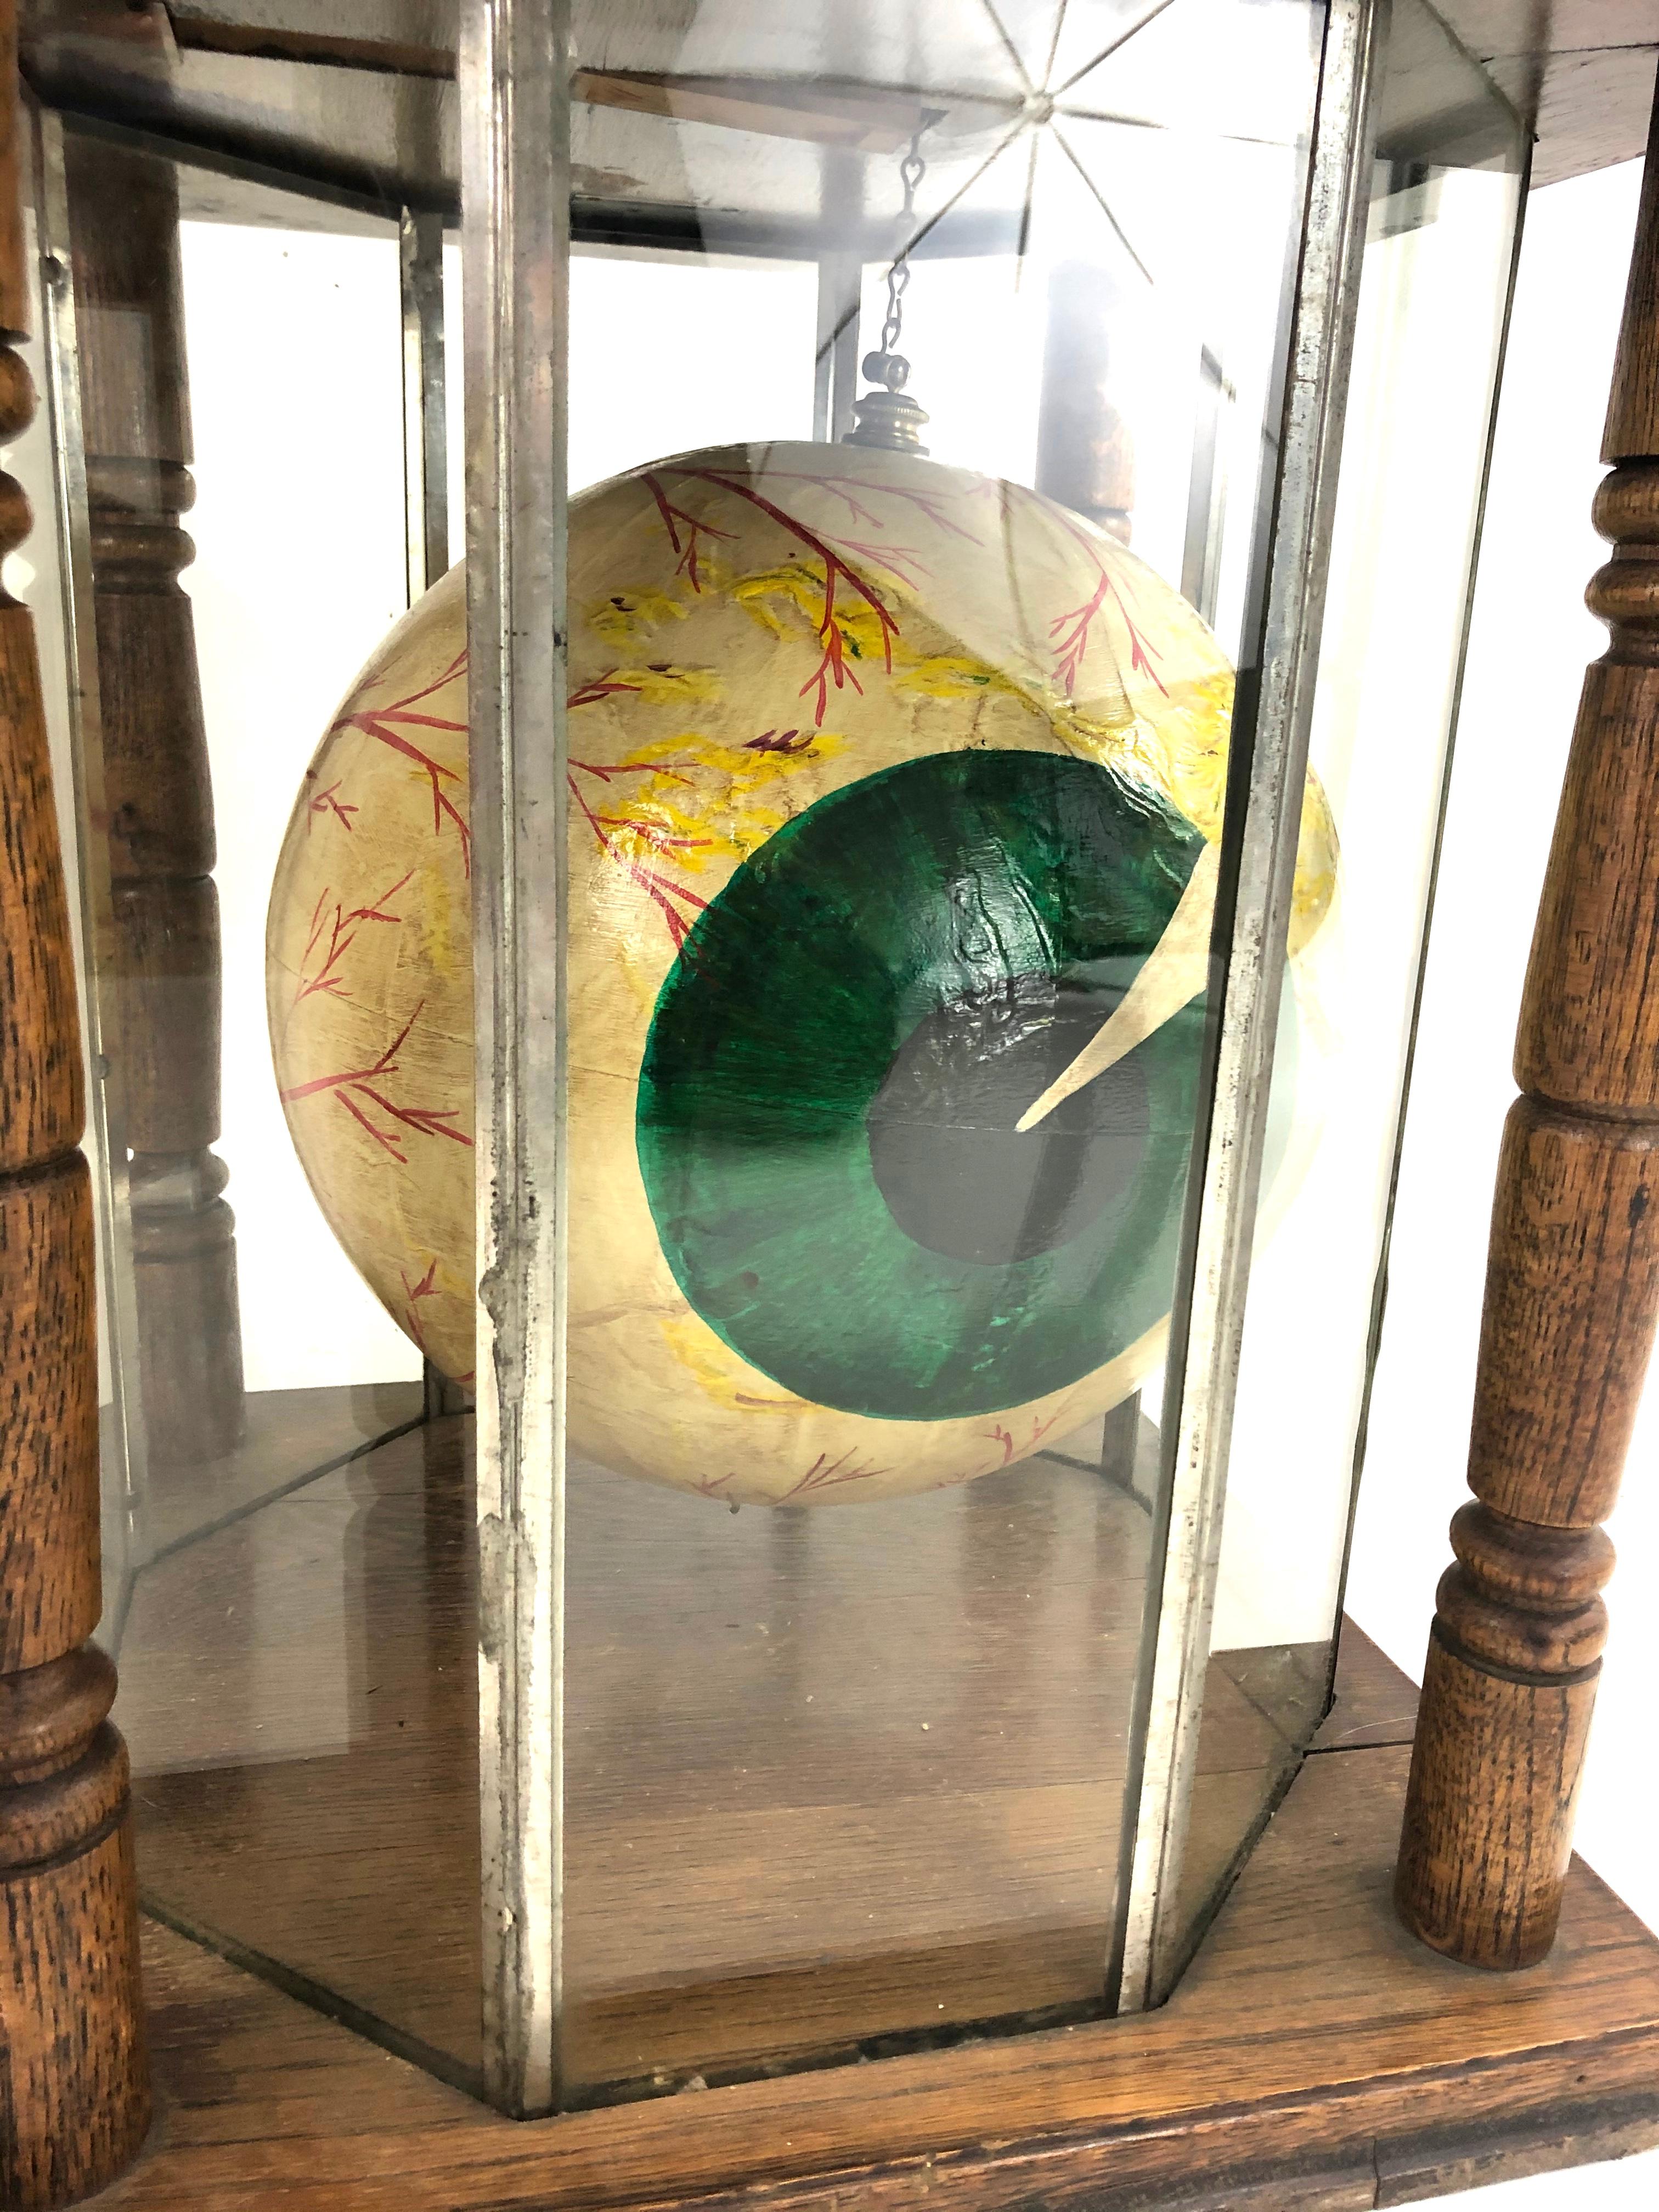 American Giant Antique Ophthalmologist's Model of an Eye in Its Original Case